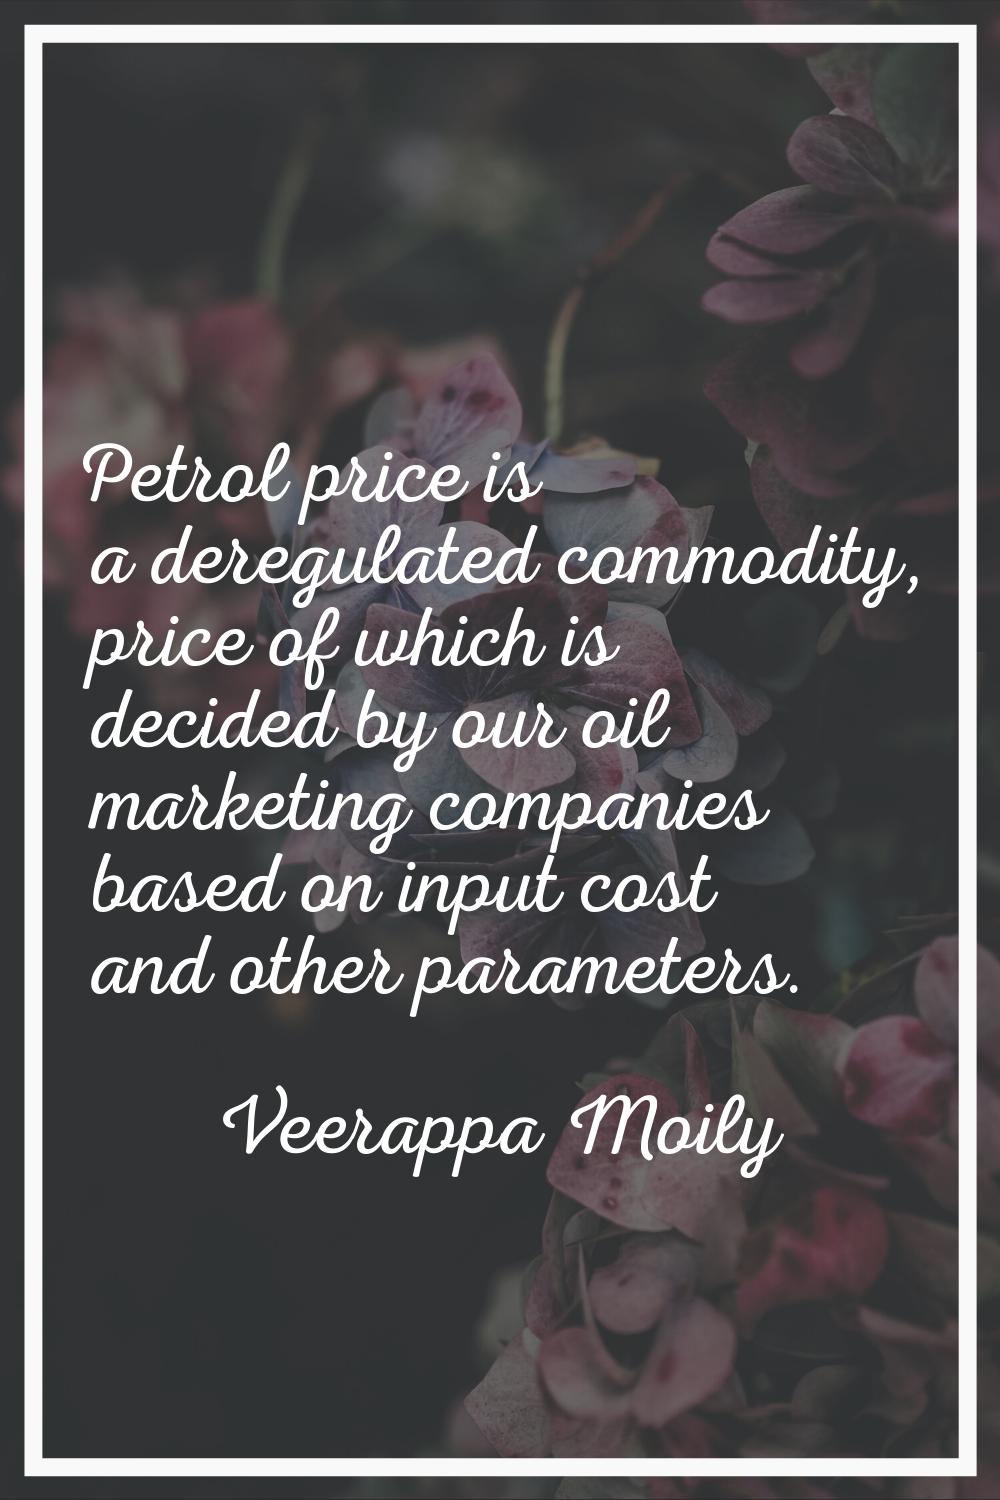 Petrol price is a deregulated commodity, price of which is decided by our oil marketing companies b